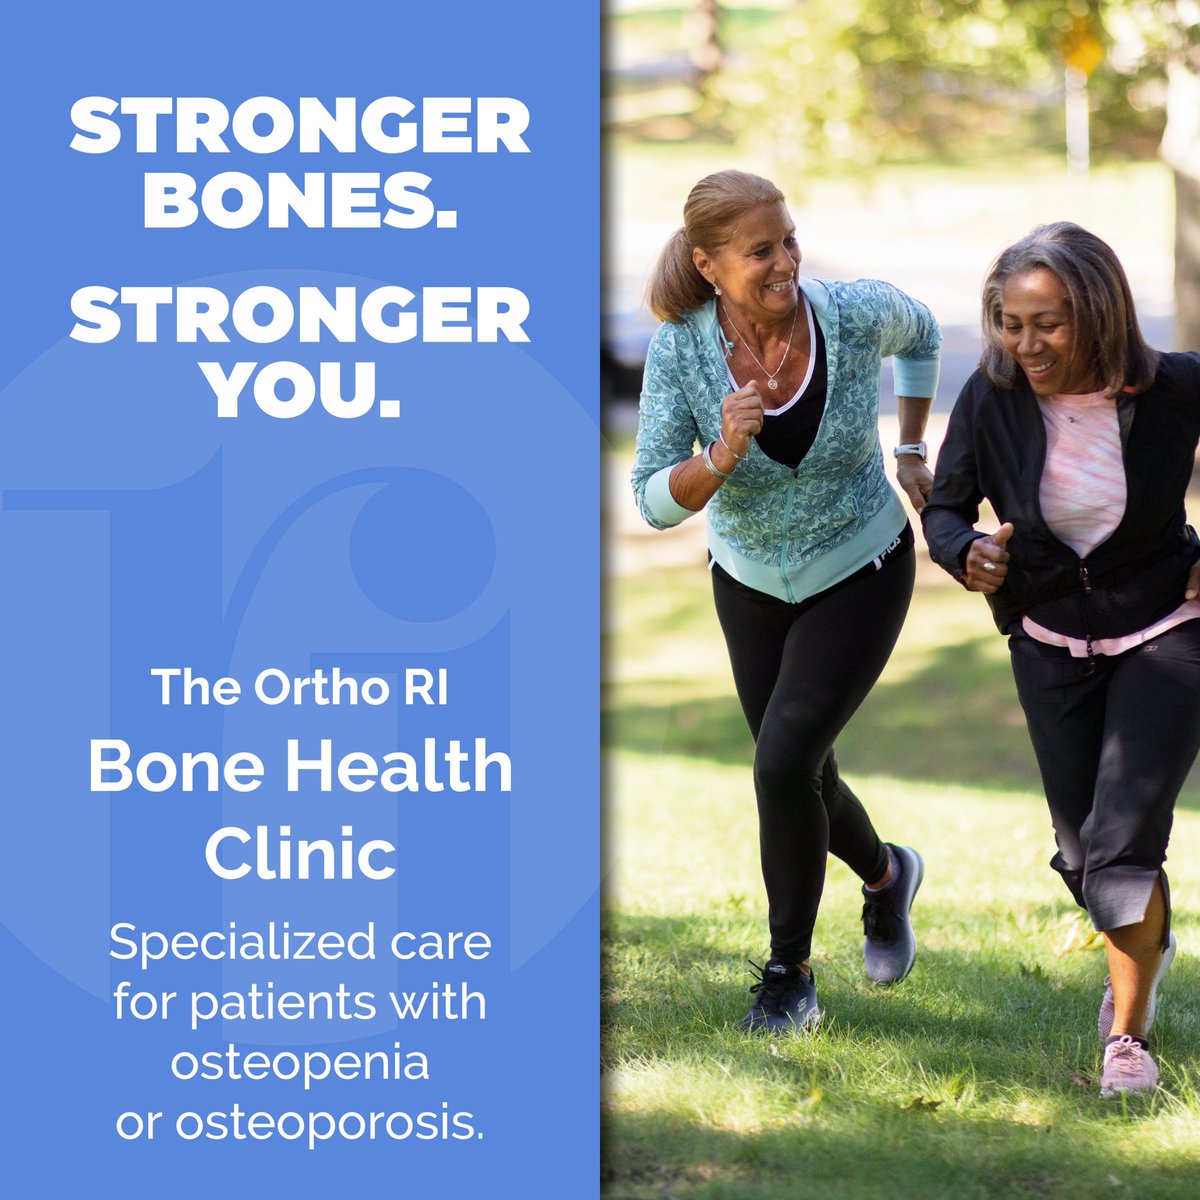 1 in 2 women and 1 in 4 men over age 50 break a bone due to osteoporosis Learn how Ortho RI can help patients who have suffered a fracture due to osteoporosis or osteopenia: orthopedicsri.com/bhc/#NationalO… #WomensHealthMonth